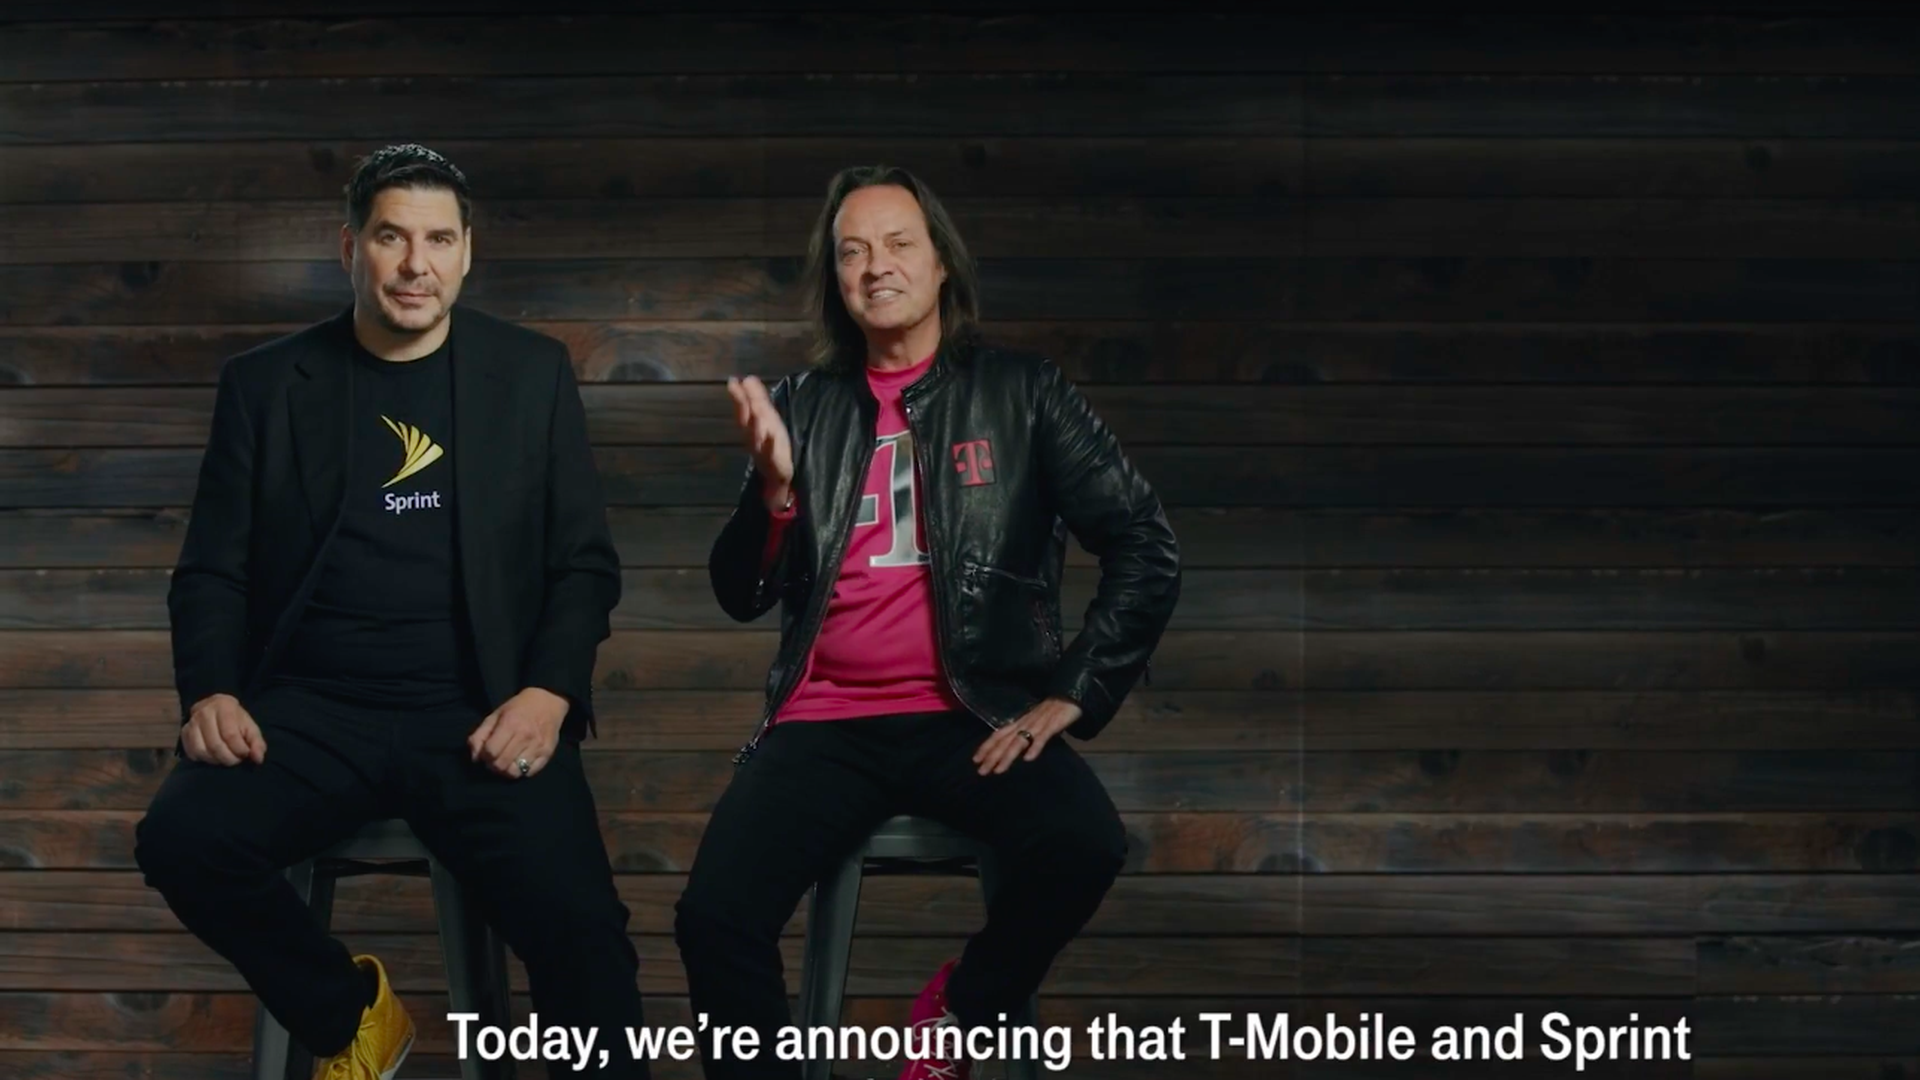 Sprint CEO Marcelo Claure and T-Mobile chief executive John Legere sit on high stools